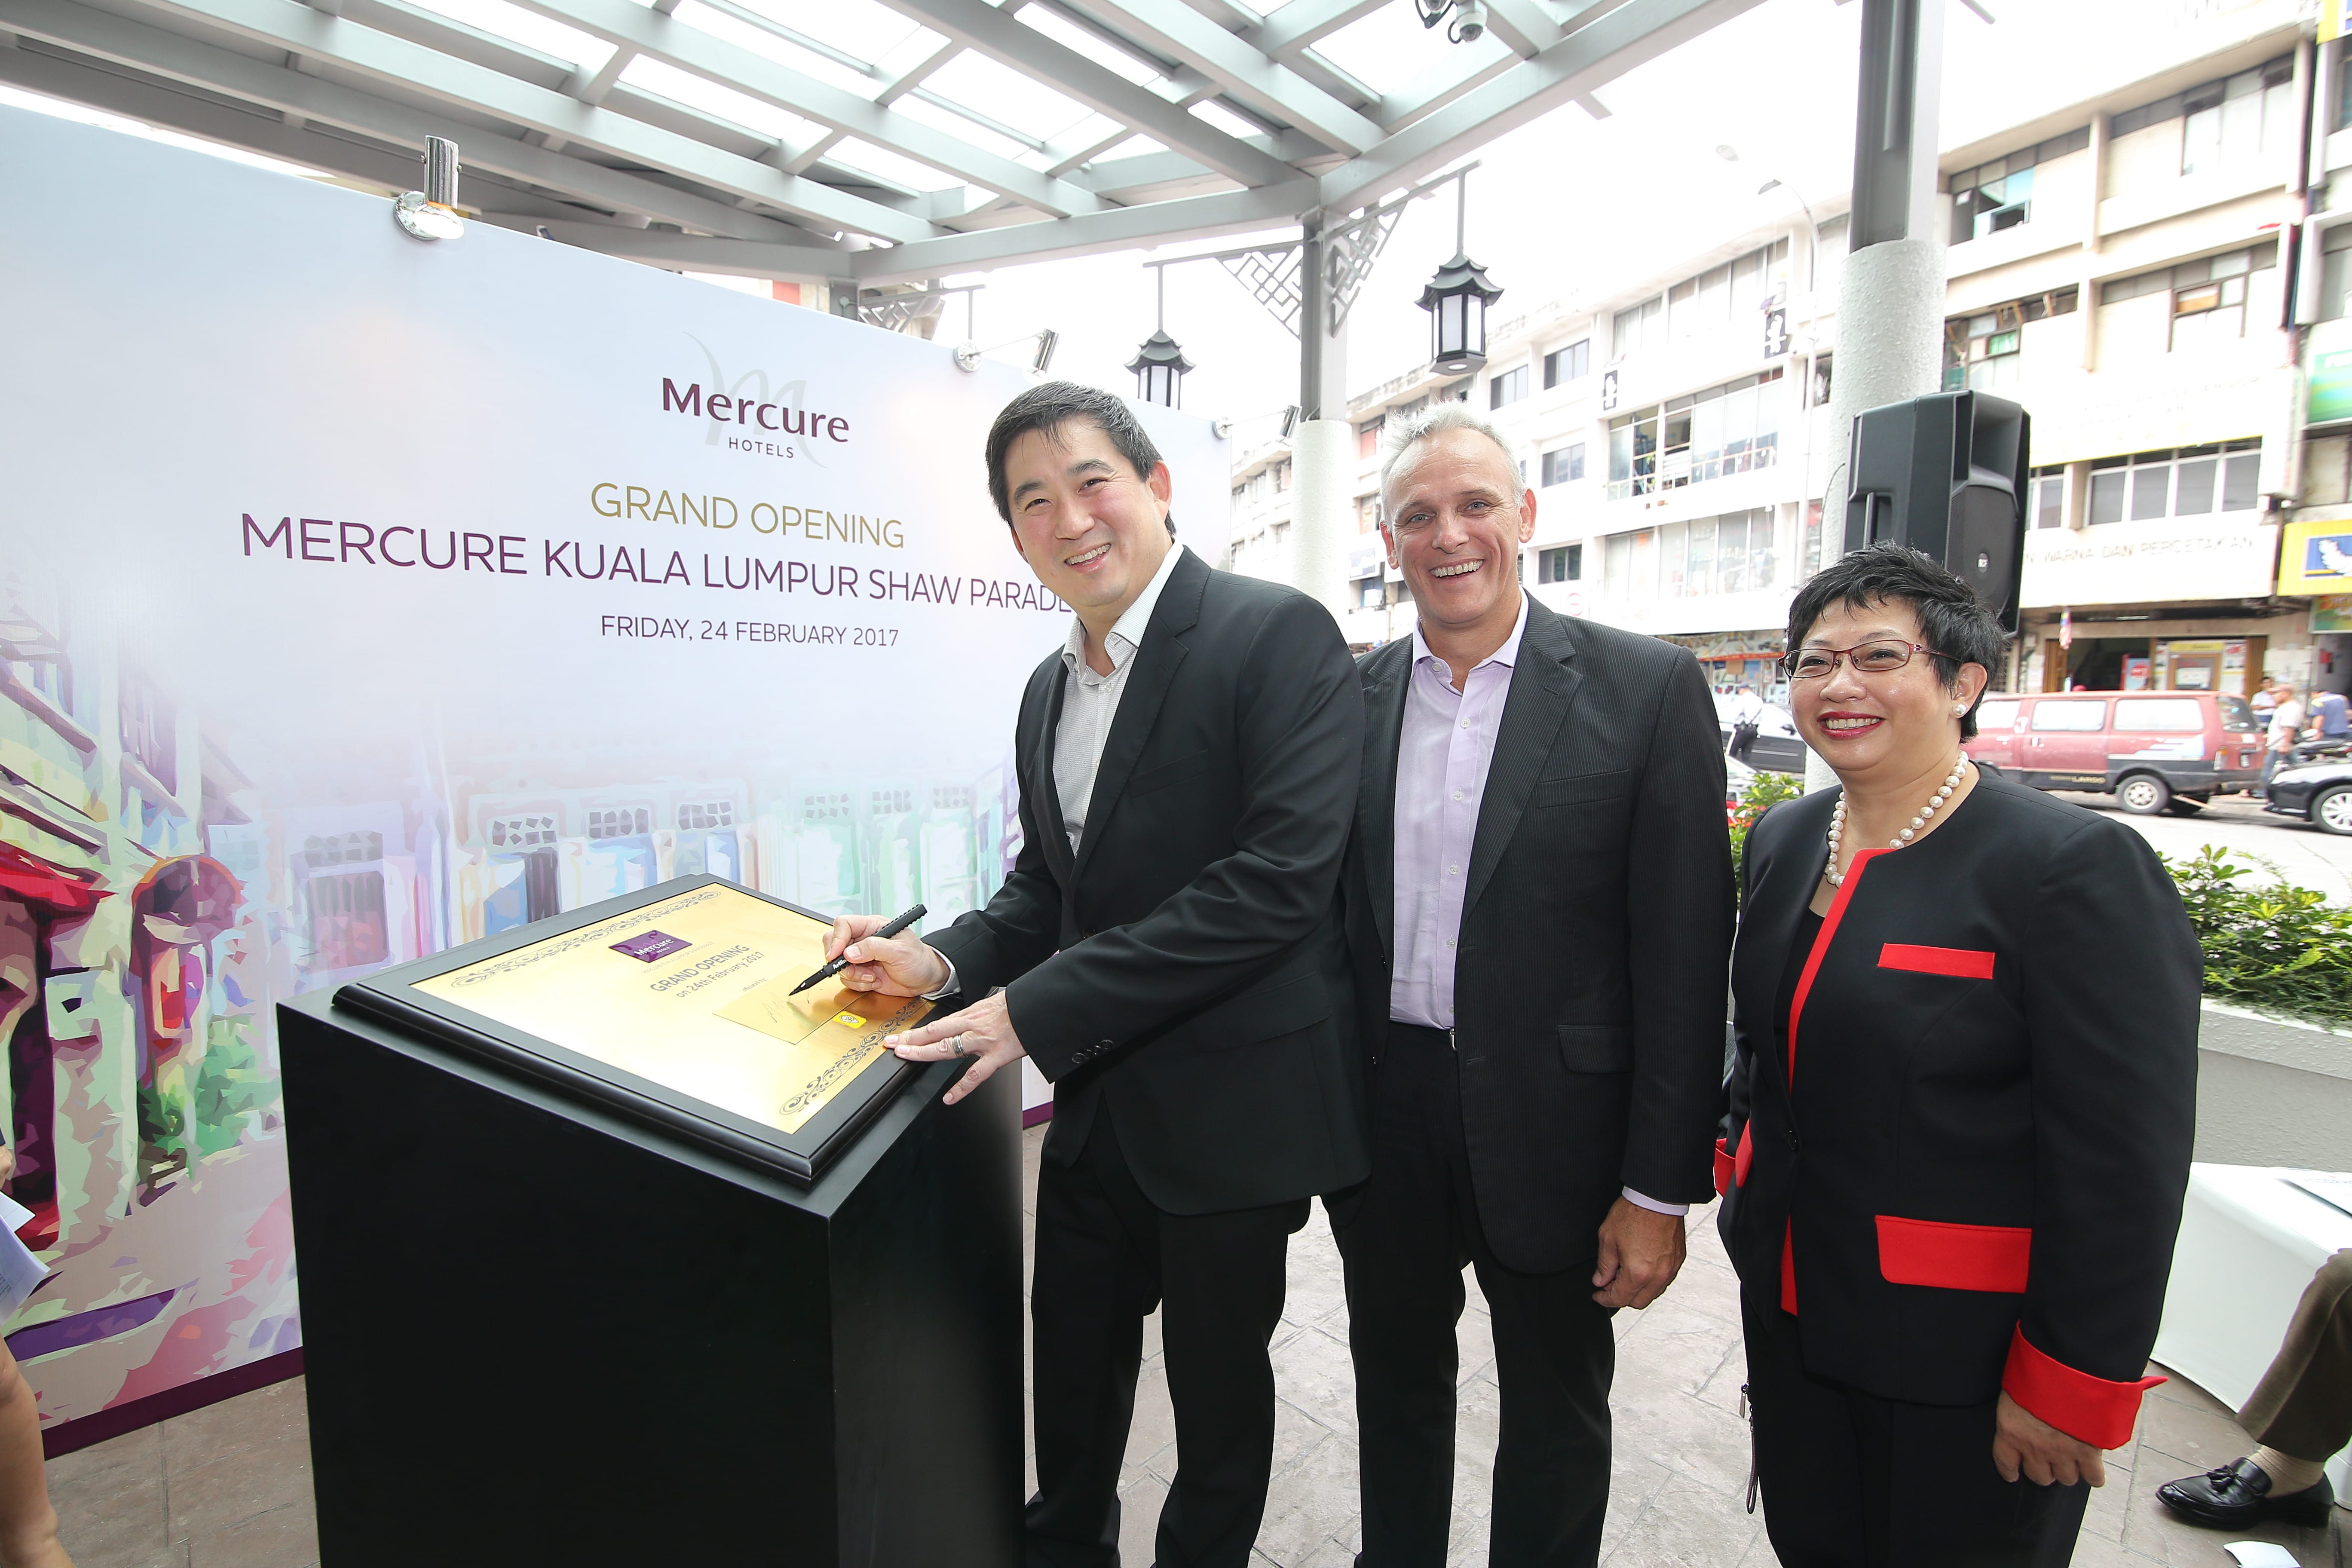 Mr Markham Shaw, Executive Vice President of Shaw Organization Pte Ltd; Mr Garth Simmons, Chief Operating Officer of Malaysia-Indonesia-Singapore AccorHotels; Ms Cindy Yeoh, General Manager of Mercure Kuala Lumpur Shaw Parade.